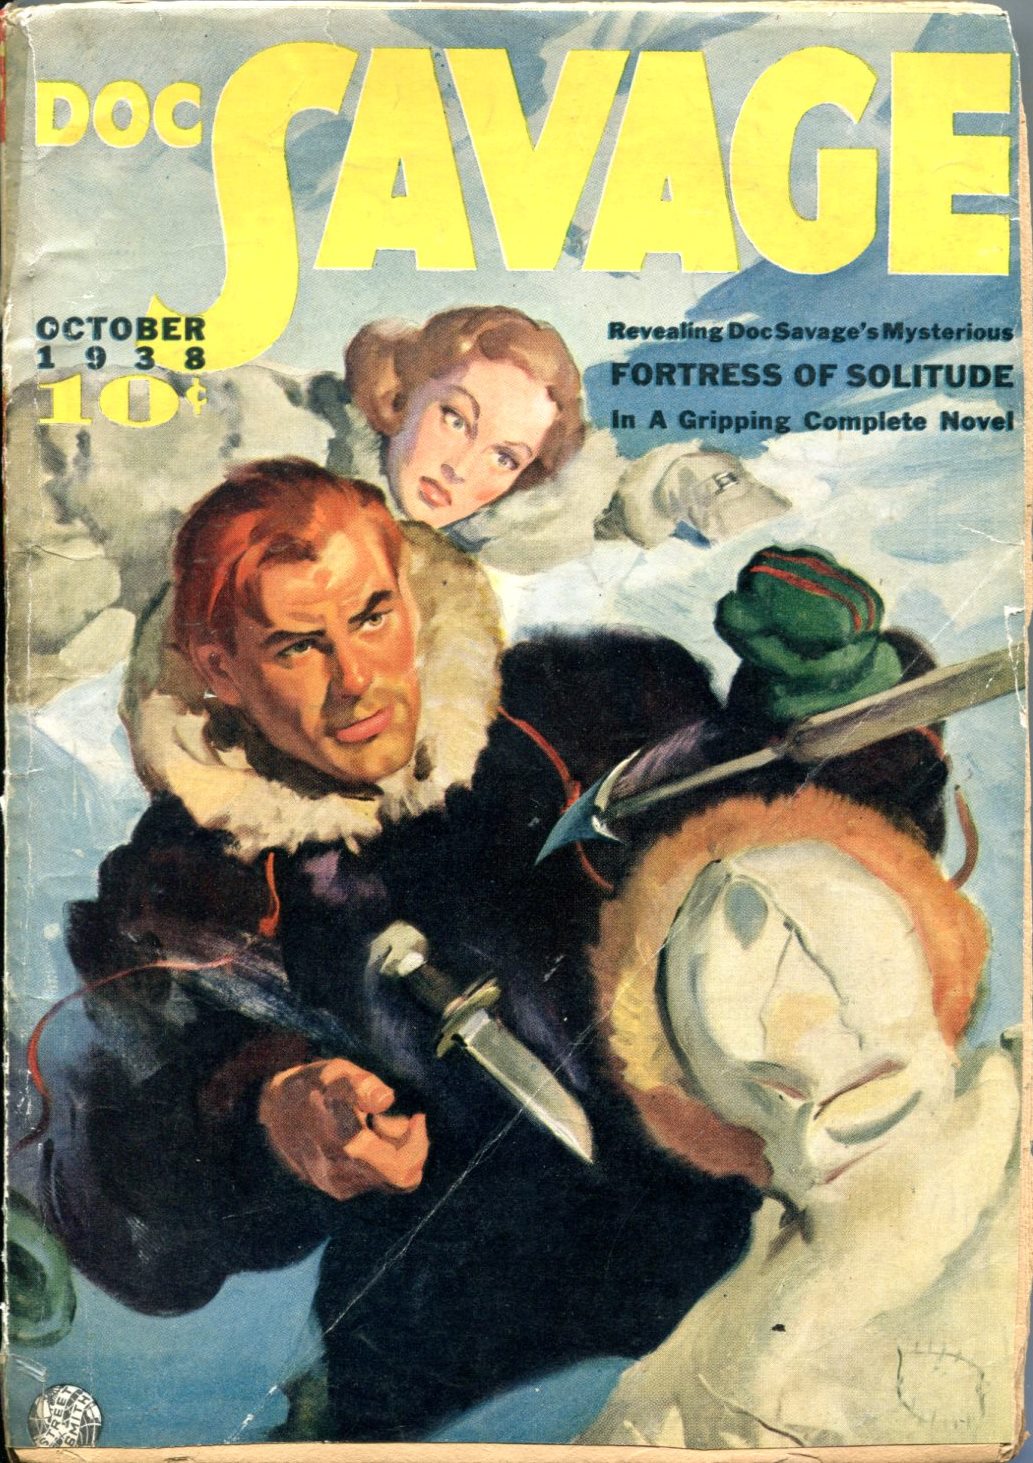 Image result for doc savage fortress of solitude pulp magazine cover